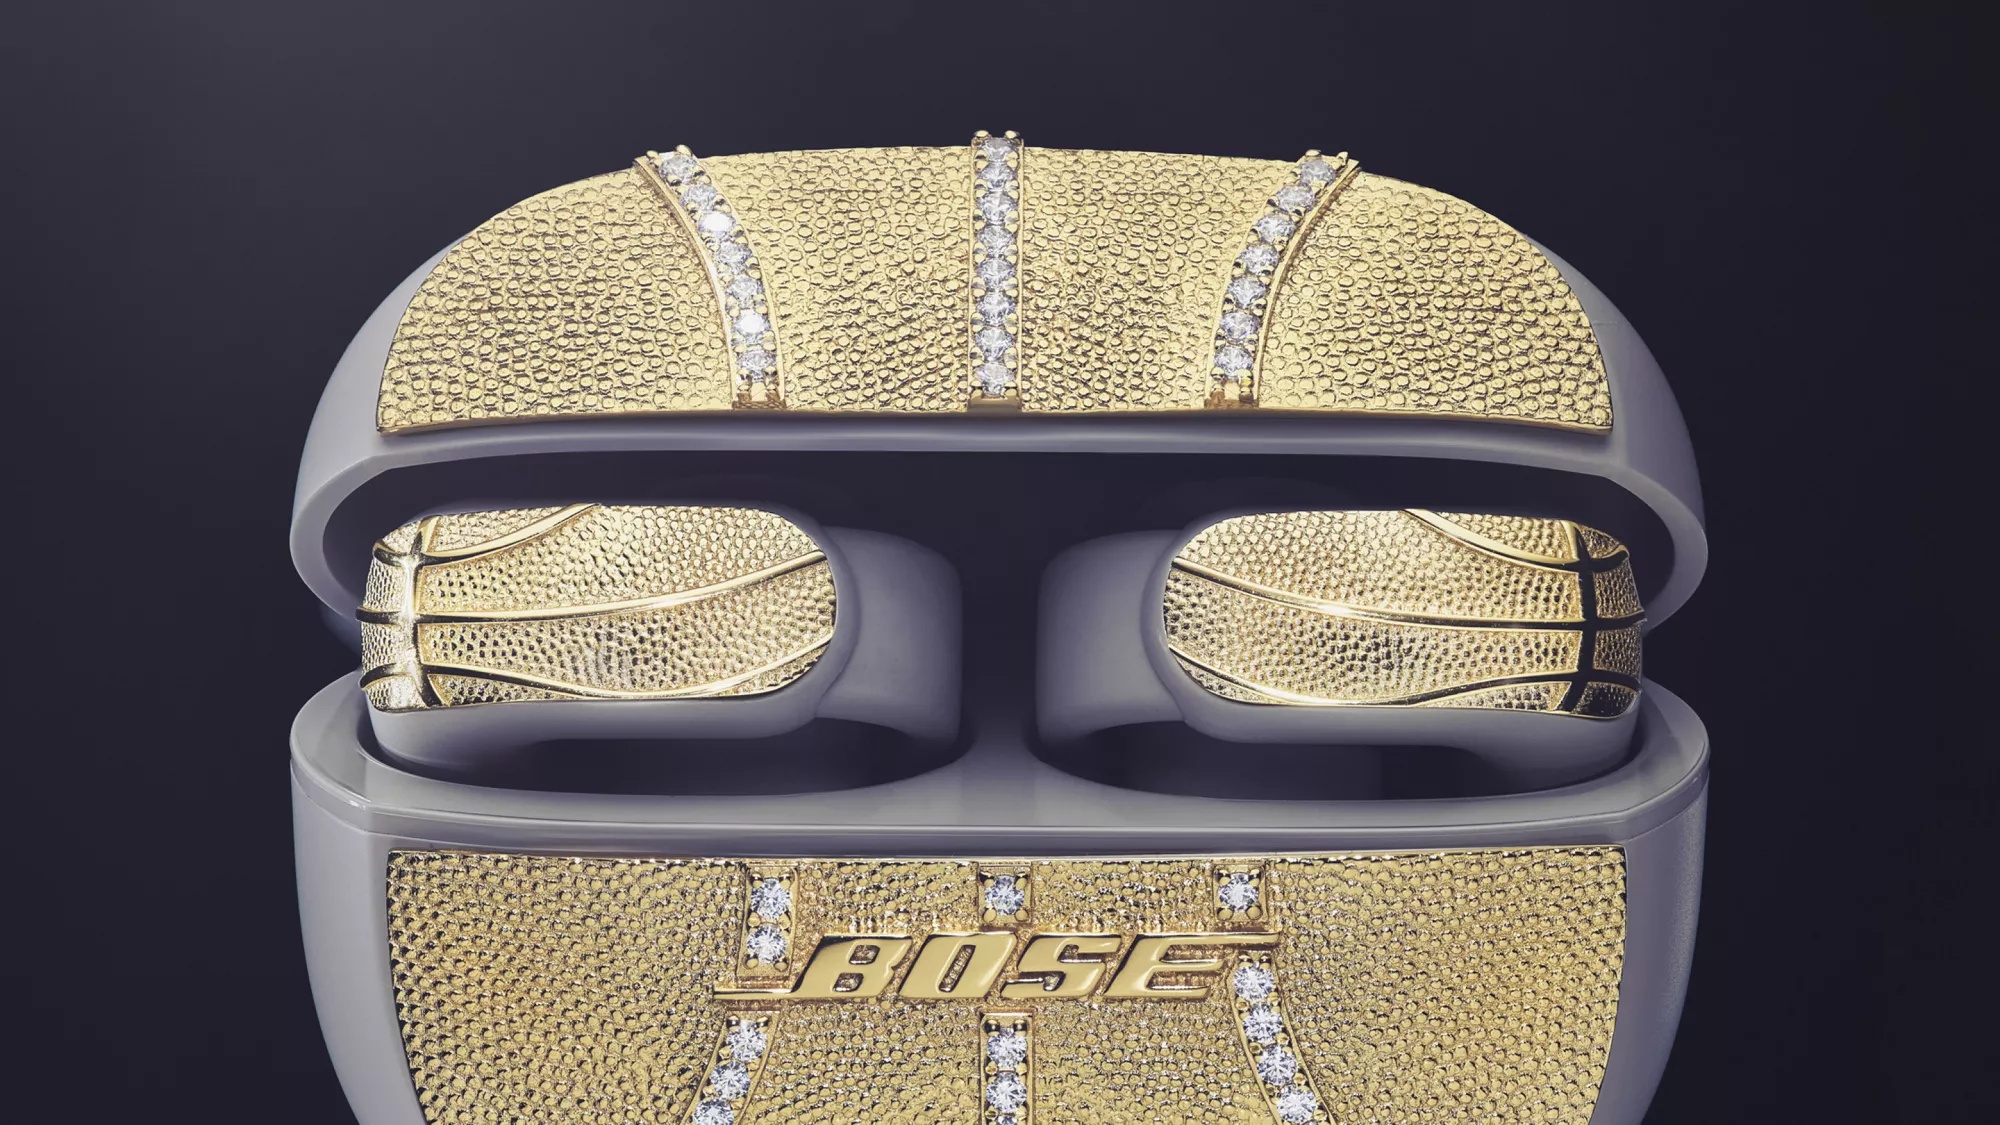 Exclusive gold-and-diamond encrusted pair of Bose Ultra Open Earbuds